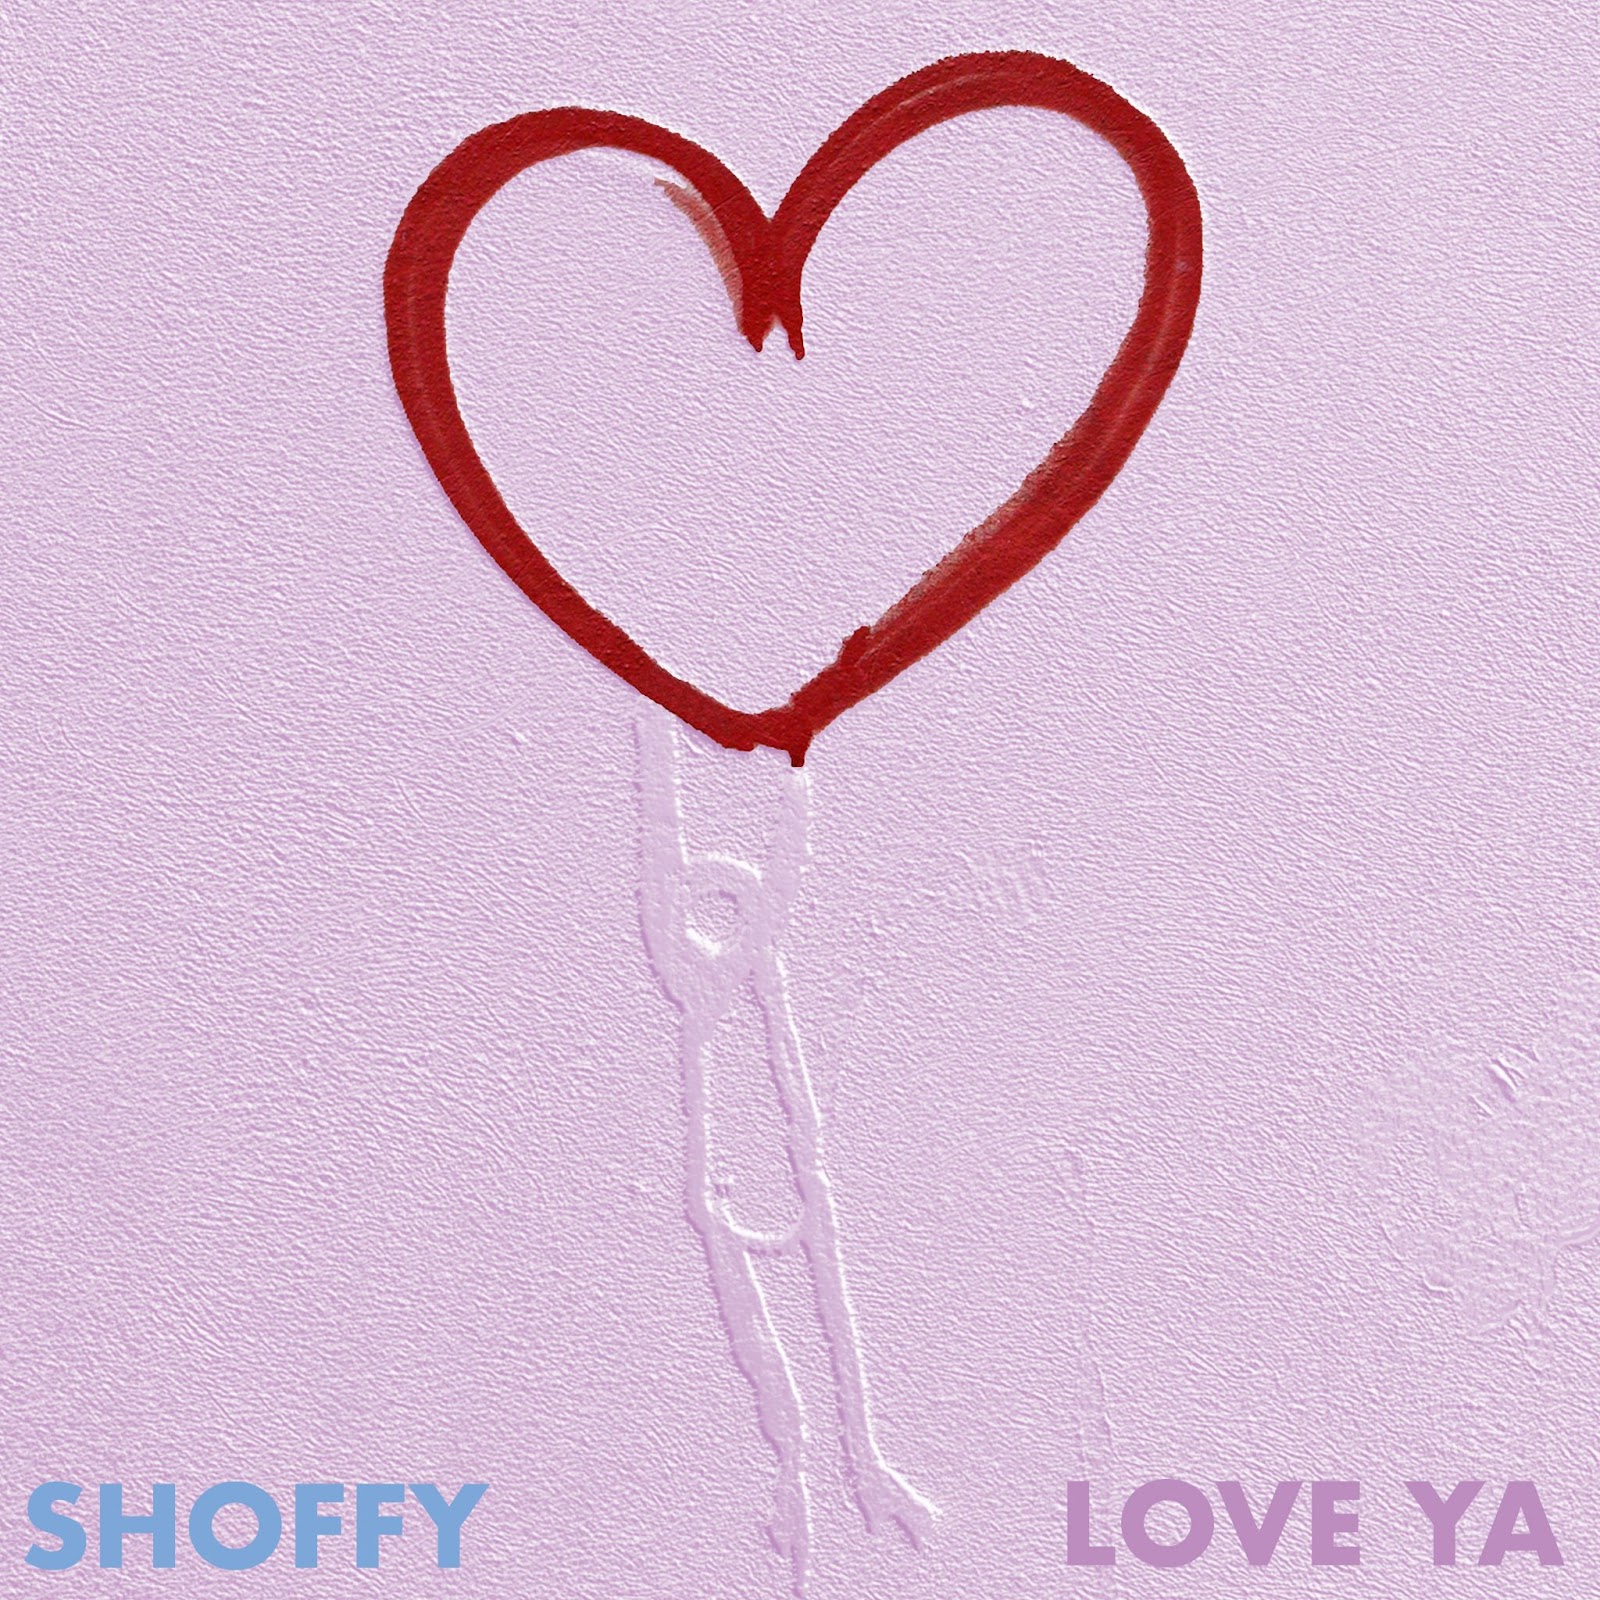 Shoffy Drops New Upbeat Dance Pop Single “Love Ya”, Positive Vibes Flowing Throughout New York!